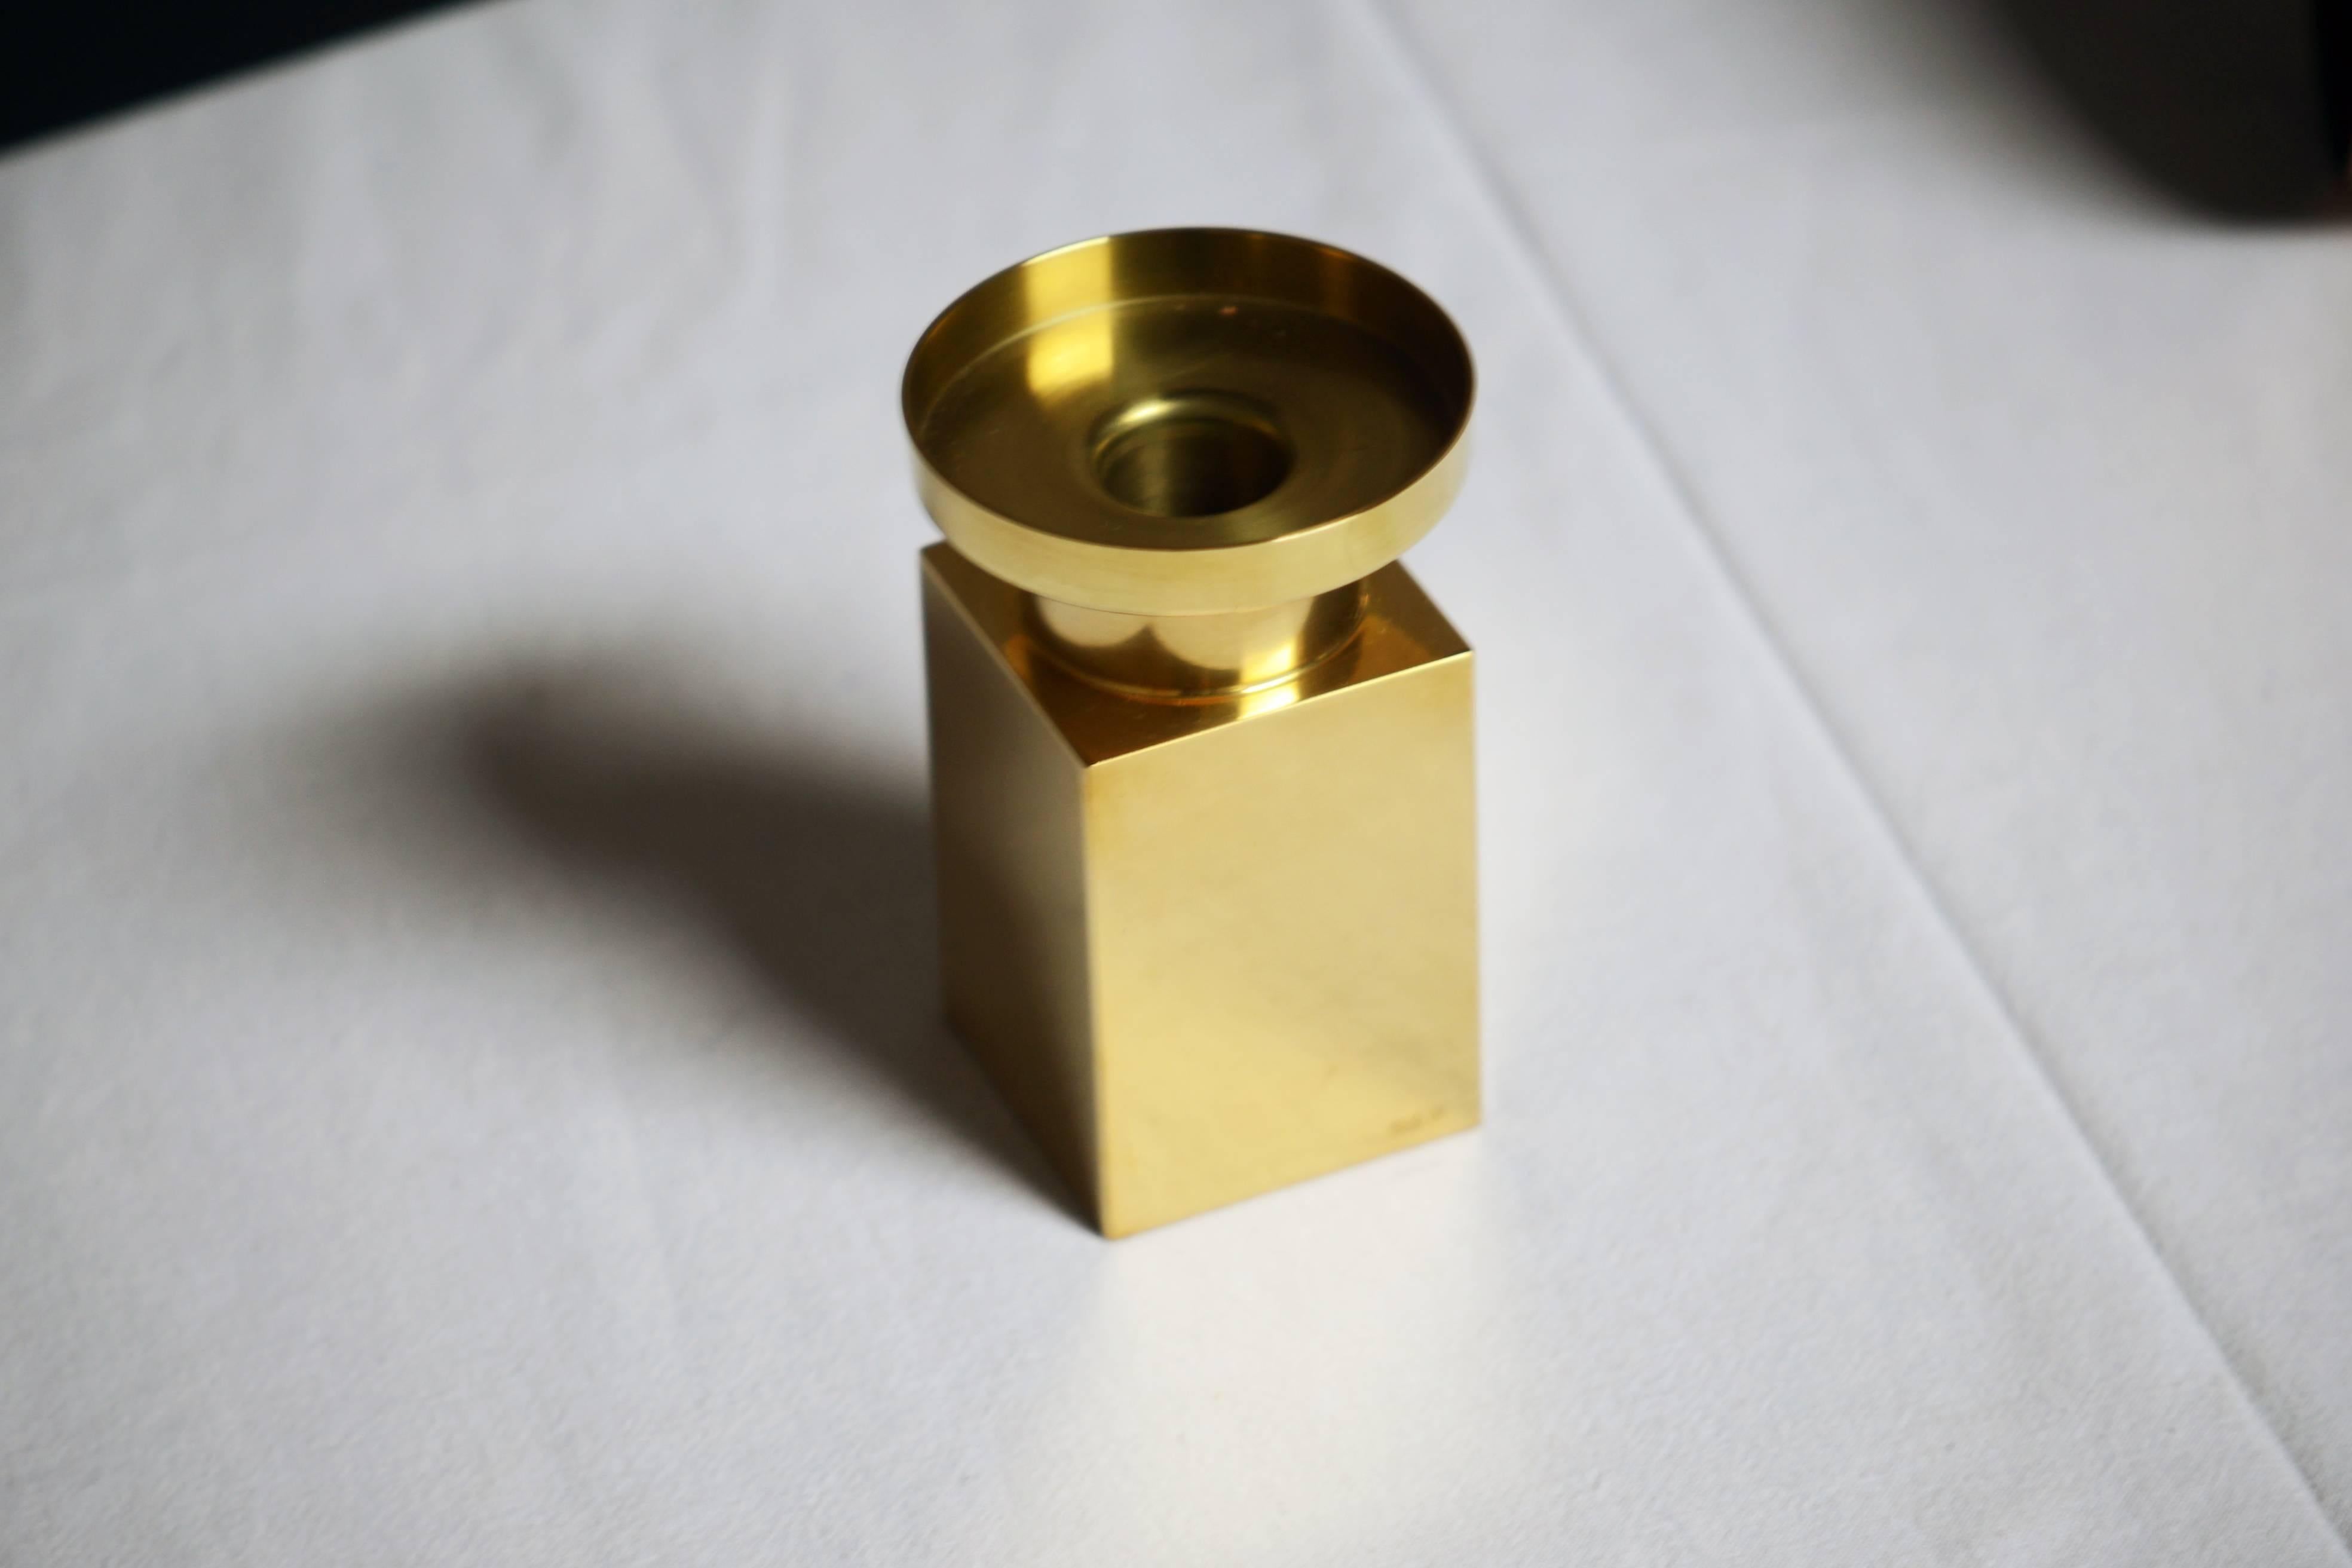 One heavy brass candlestick.

Sigurd Persson, (1914-2003). Sigurd Persson began as a silversmith, but over a long path constantly tried new genres and among other things, worked as a glass artist, designer and sculptor. During the 1950 and 1960